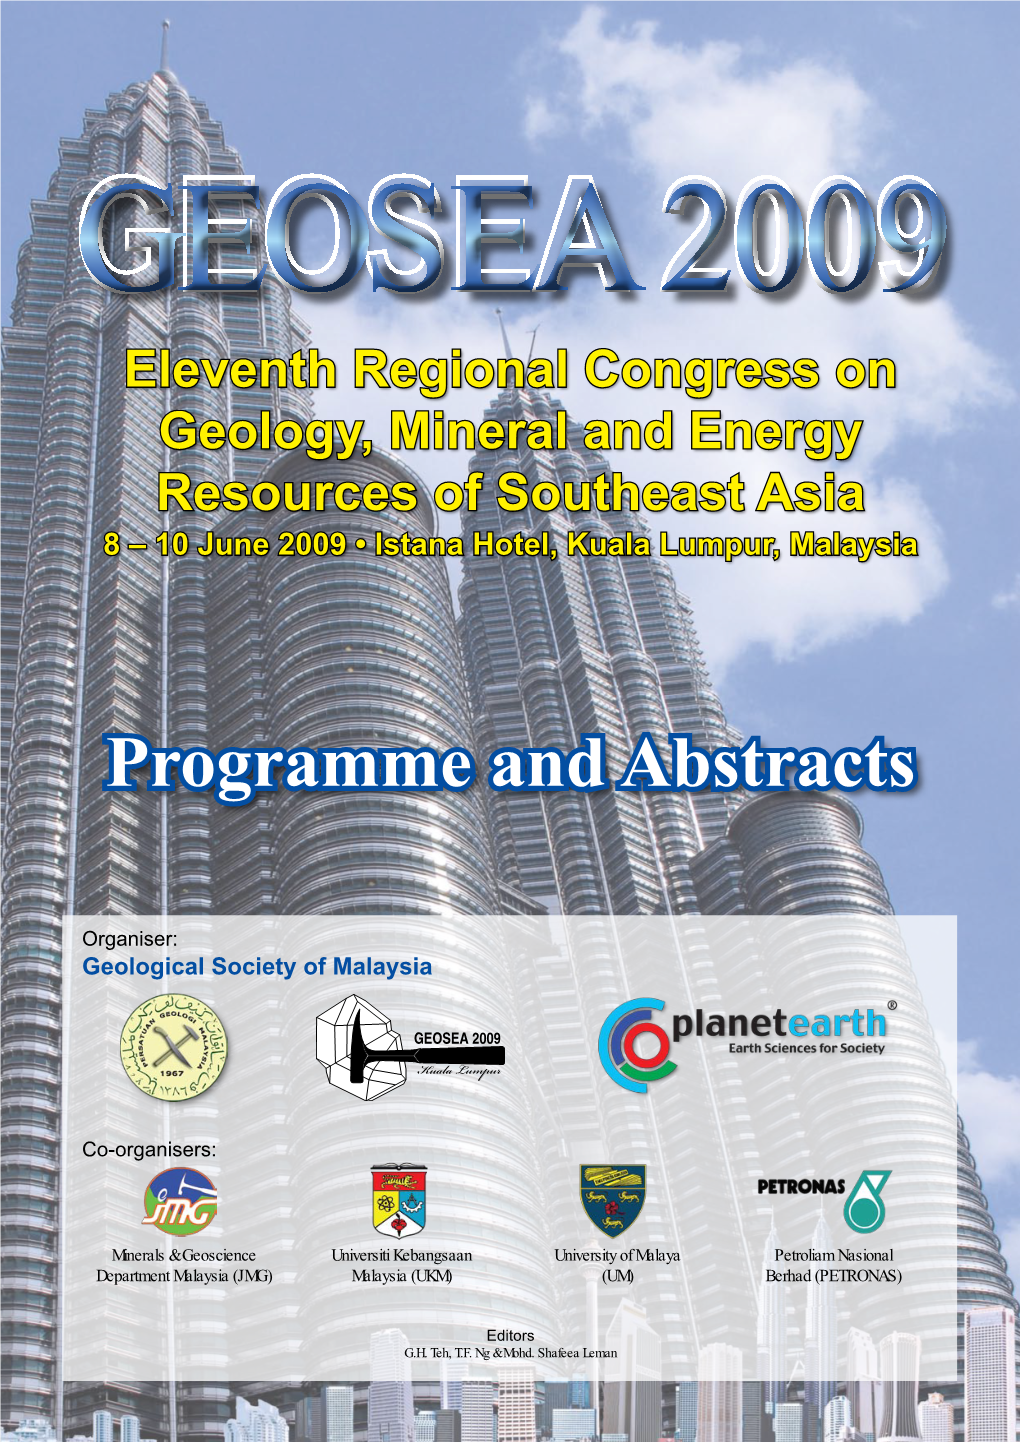 Eleventh Regional Congress on Geology, Mineral and Energy Resources of Southeast Asia 8 – 10 June 2009 • Istana Hotel, Kuala Lumpur, Malaysia